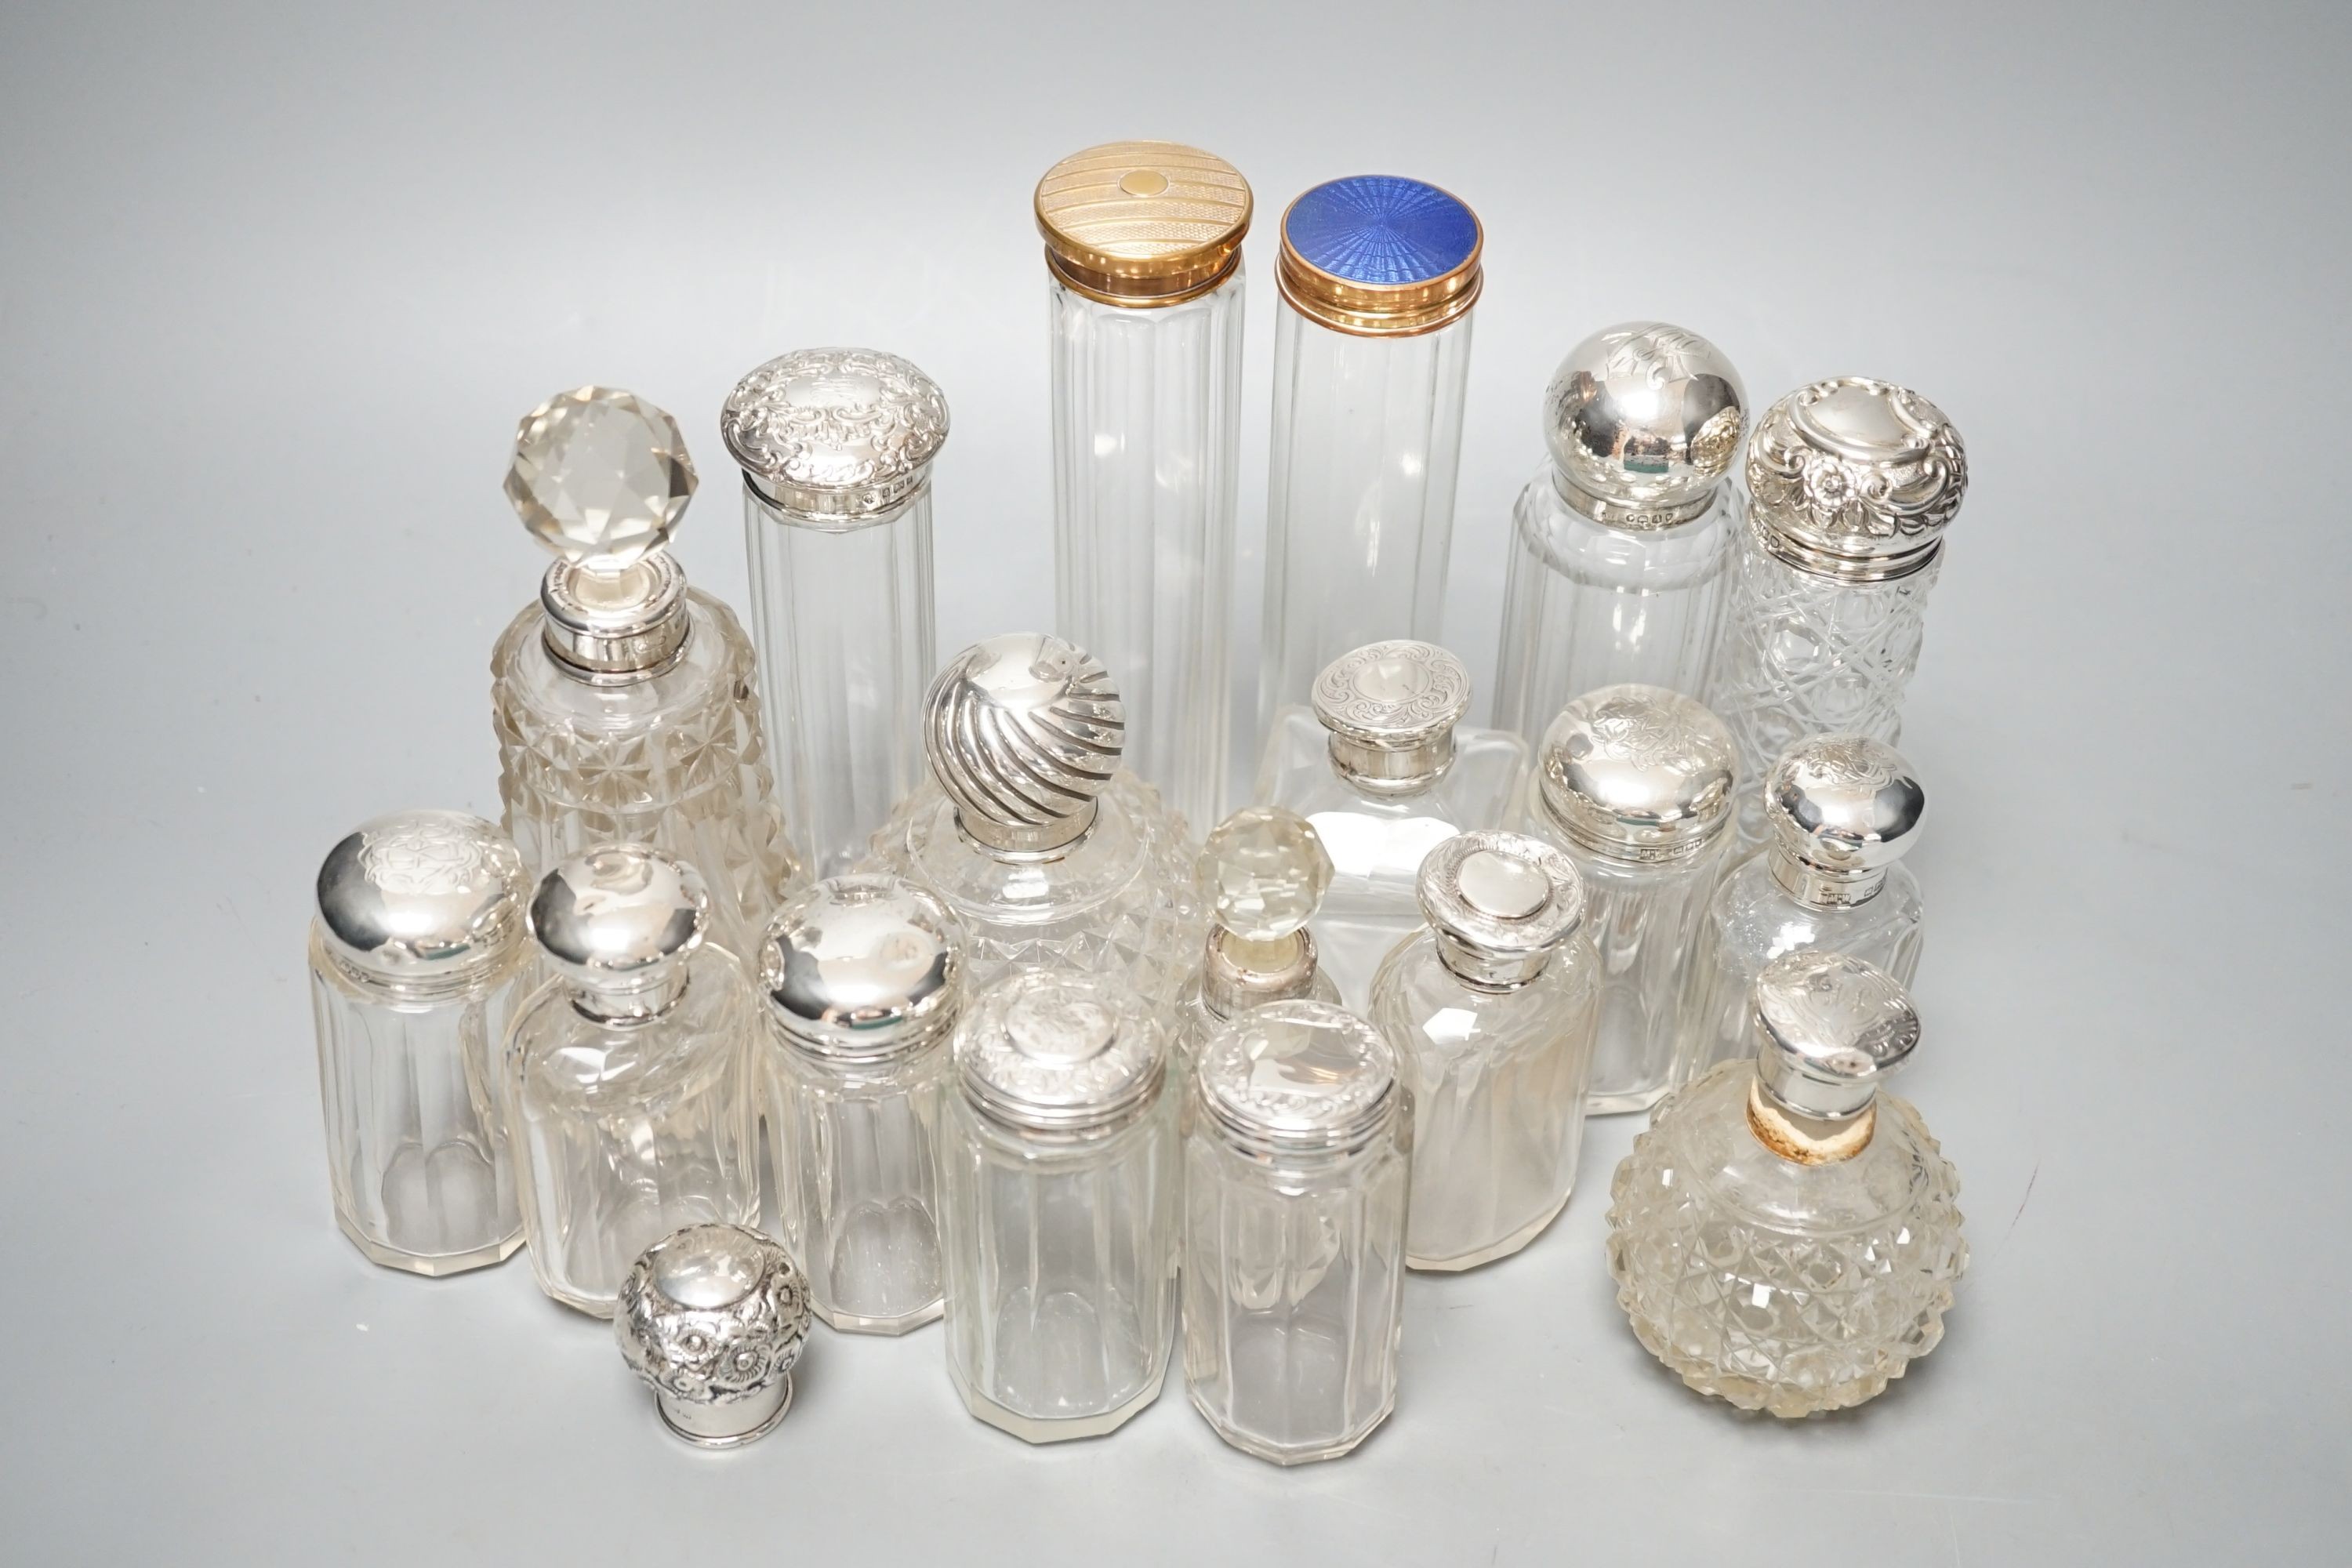 A collection of assorted mainly silver-capped scent bottles and toilet bottles.